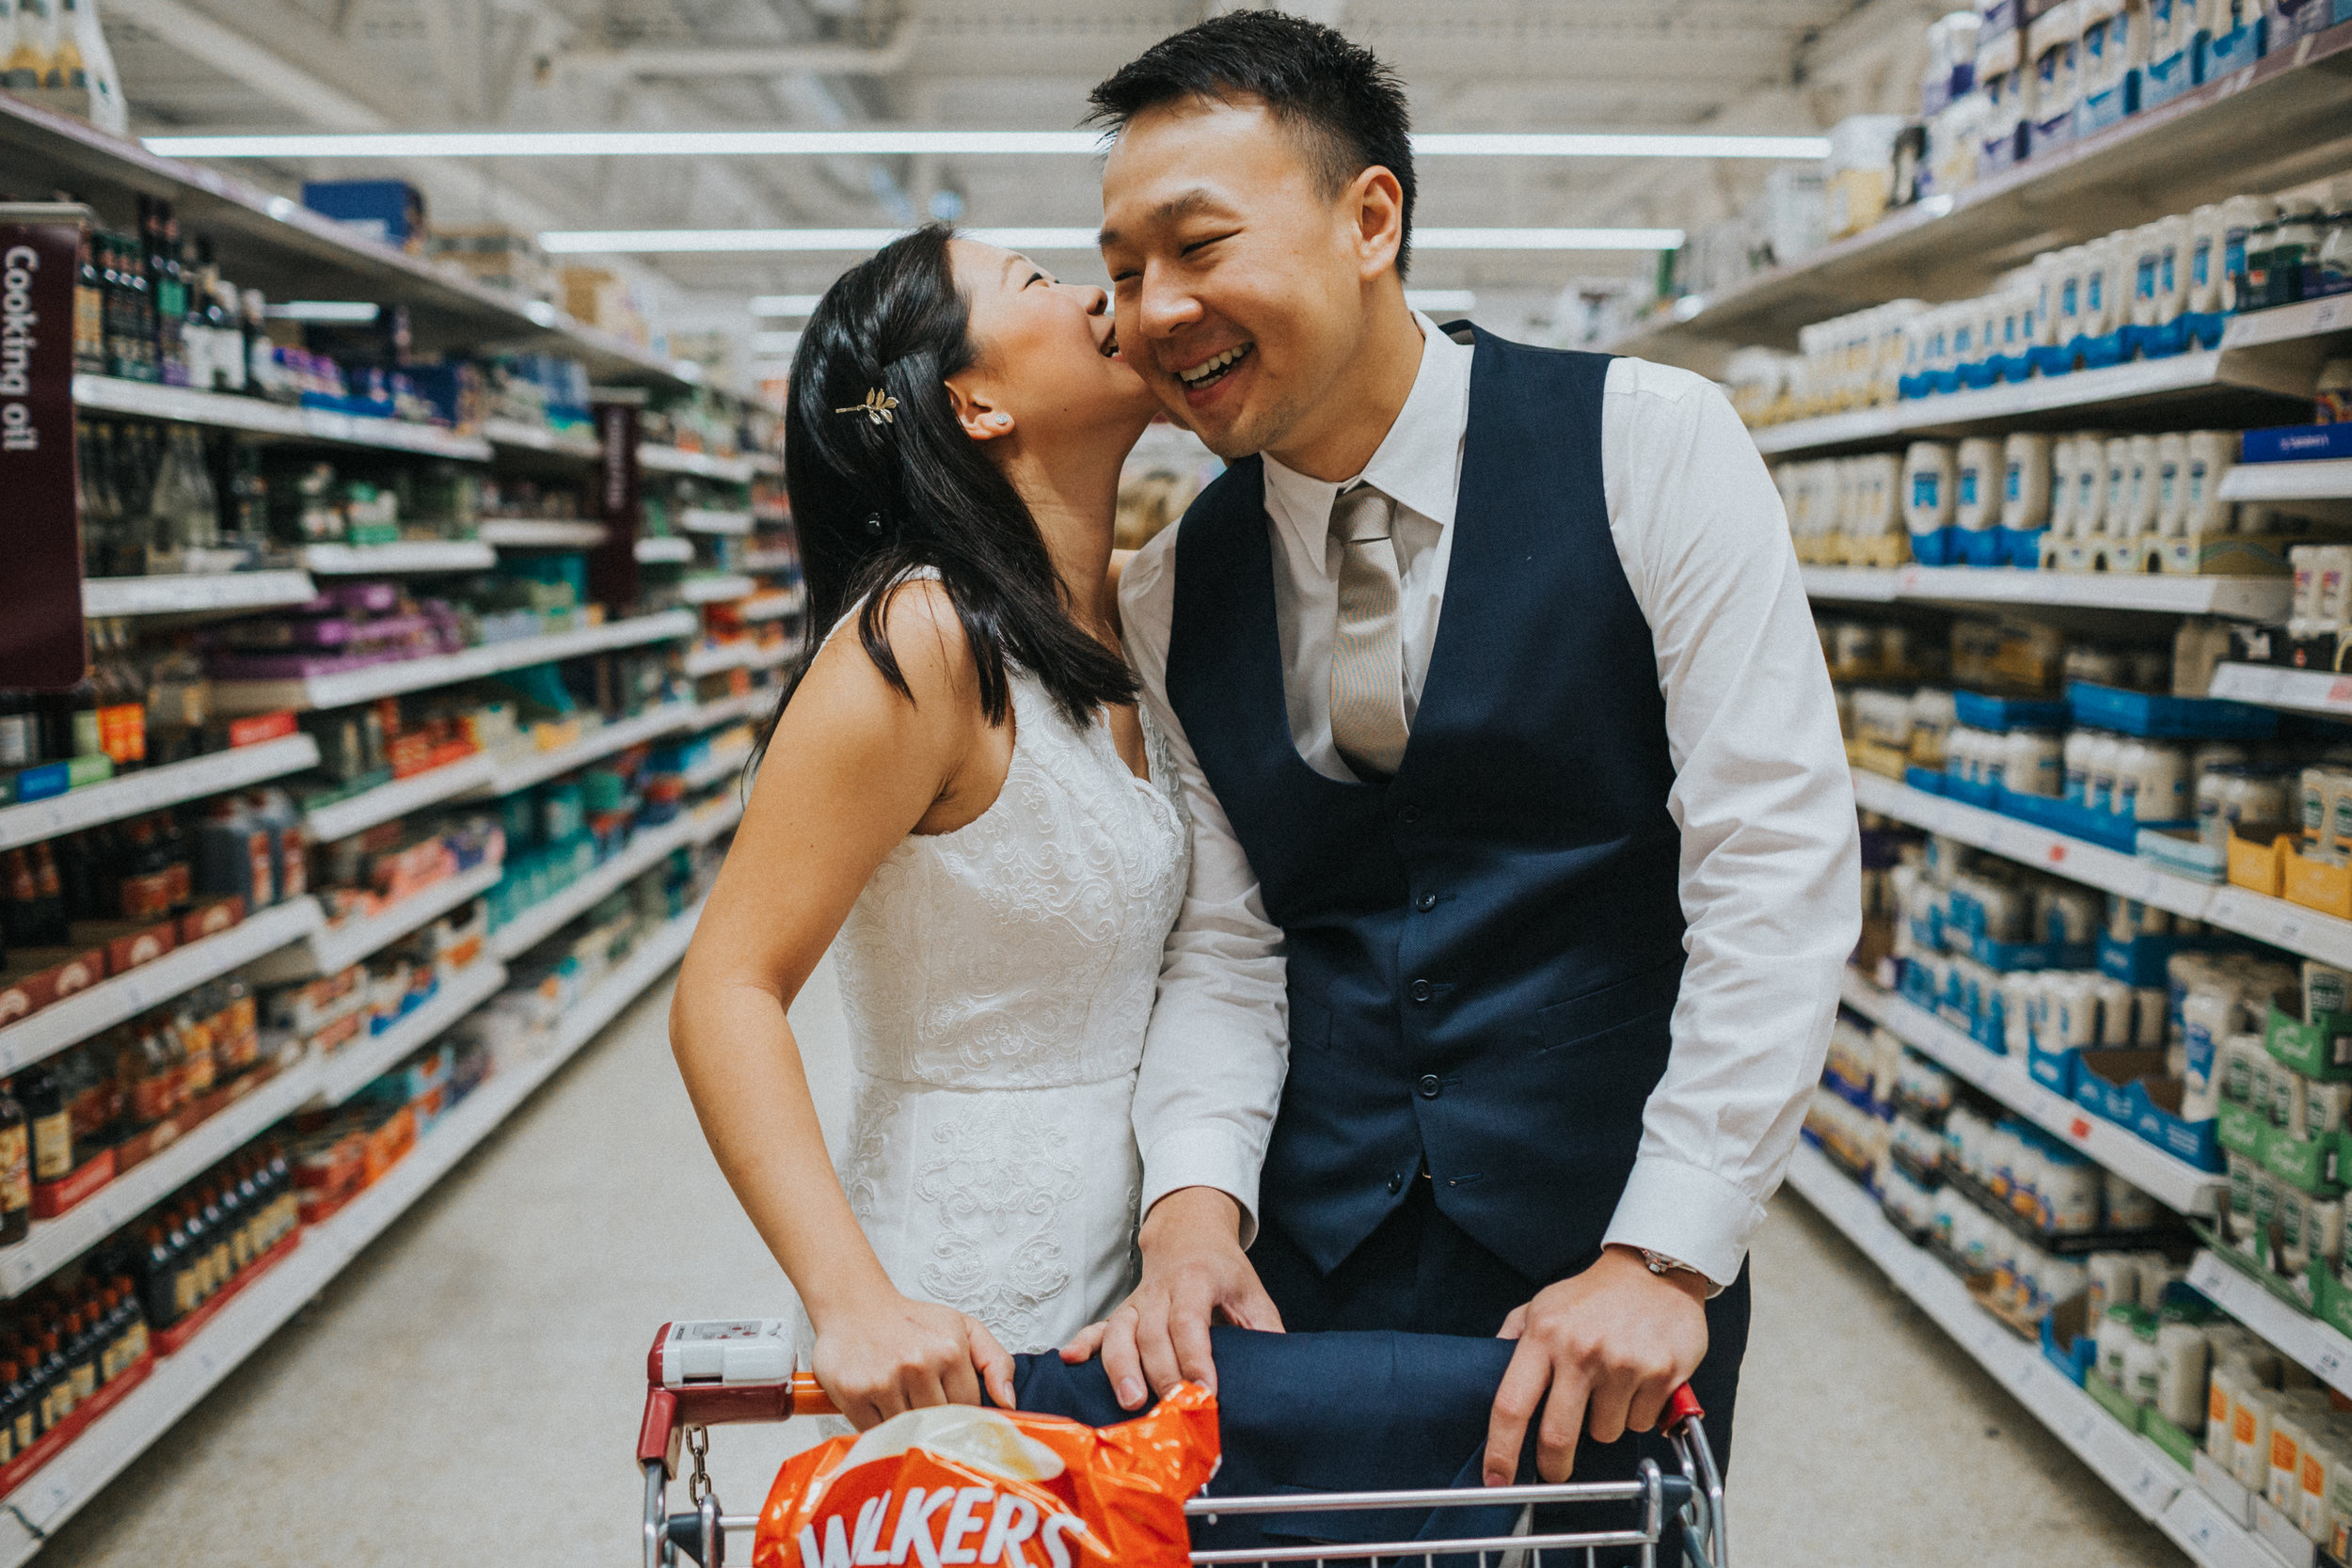 Bride whispers into grooms ear in supermarket. 